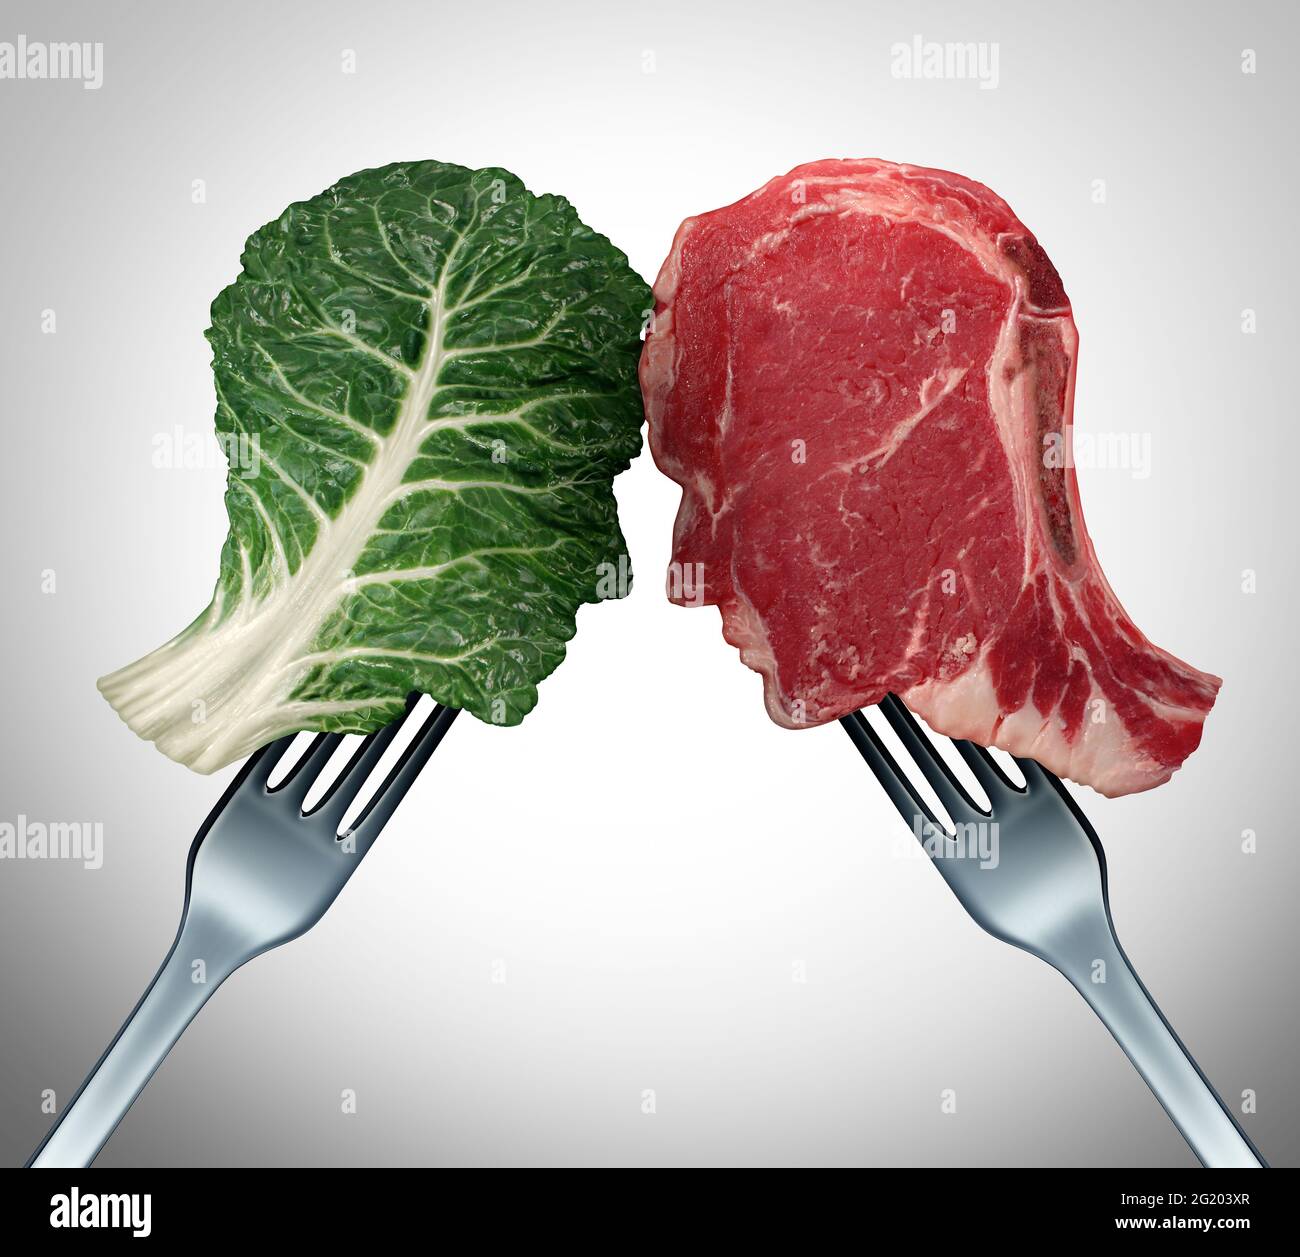 Food choices and health related eating options as a human head shaped green vegetable kale leaf and meat as a red steak for nutritional decisions. Stock Photo